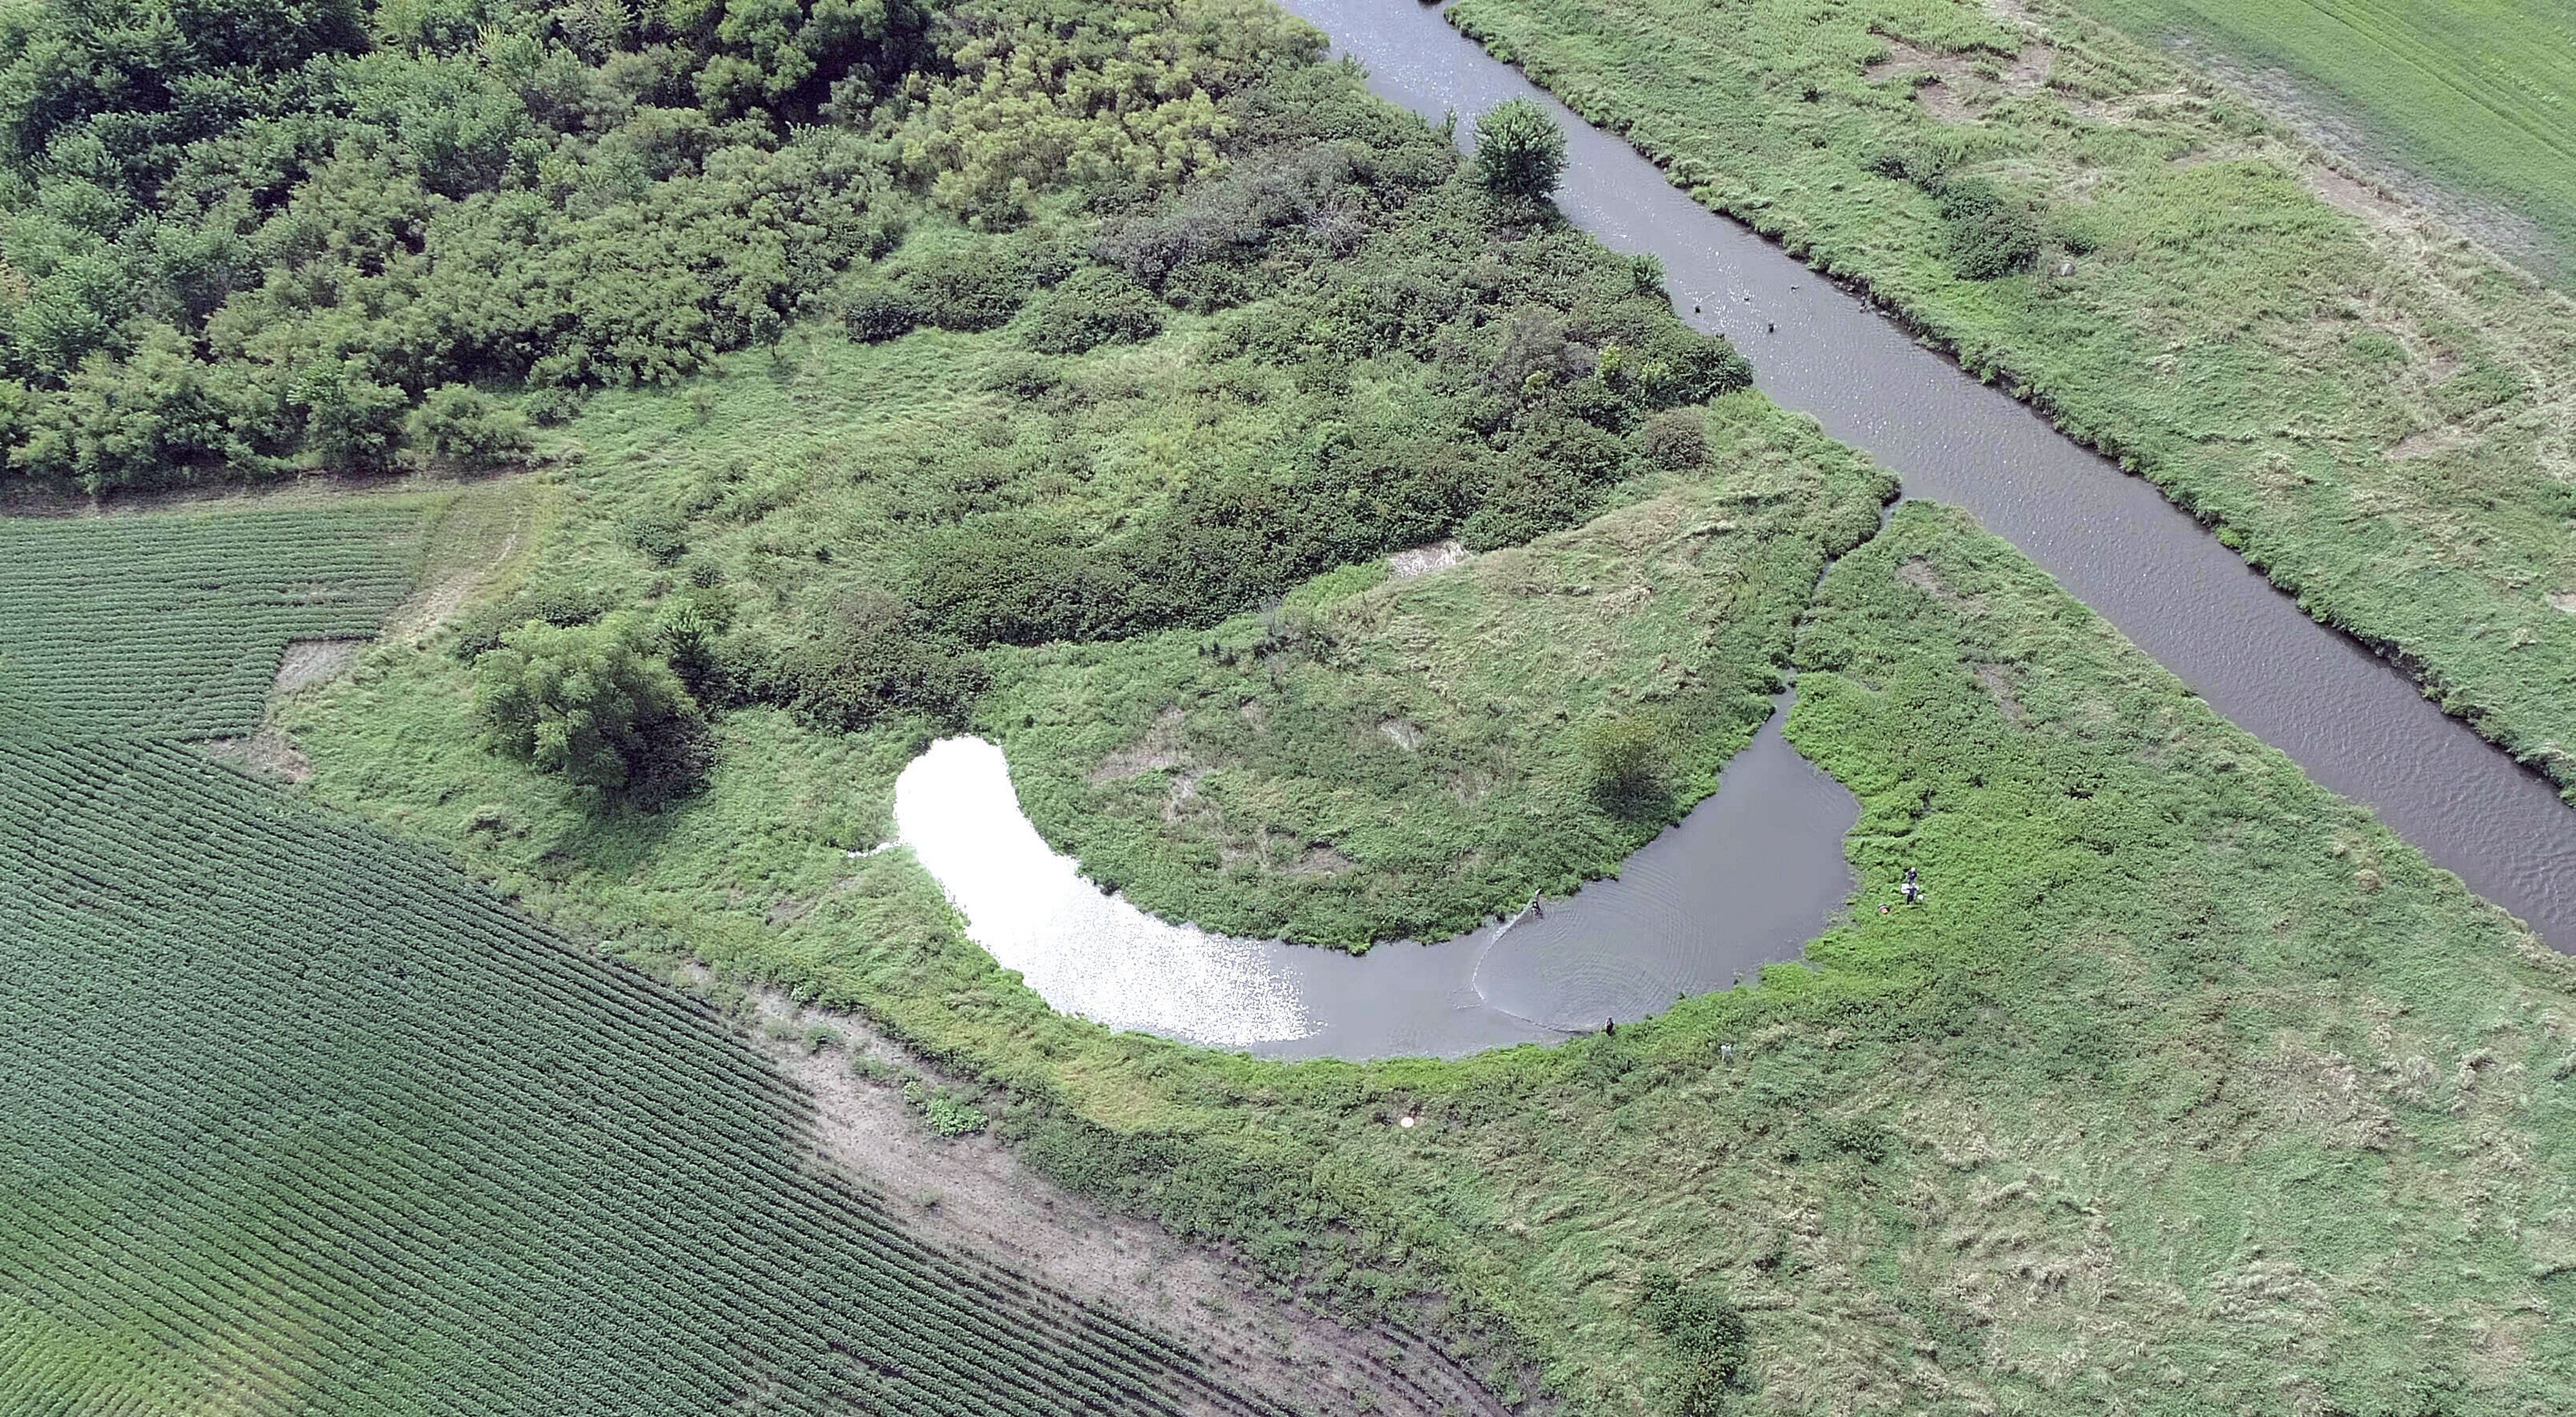 Aerial view of a comma-shaped oxbow next to the main channel of a river.